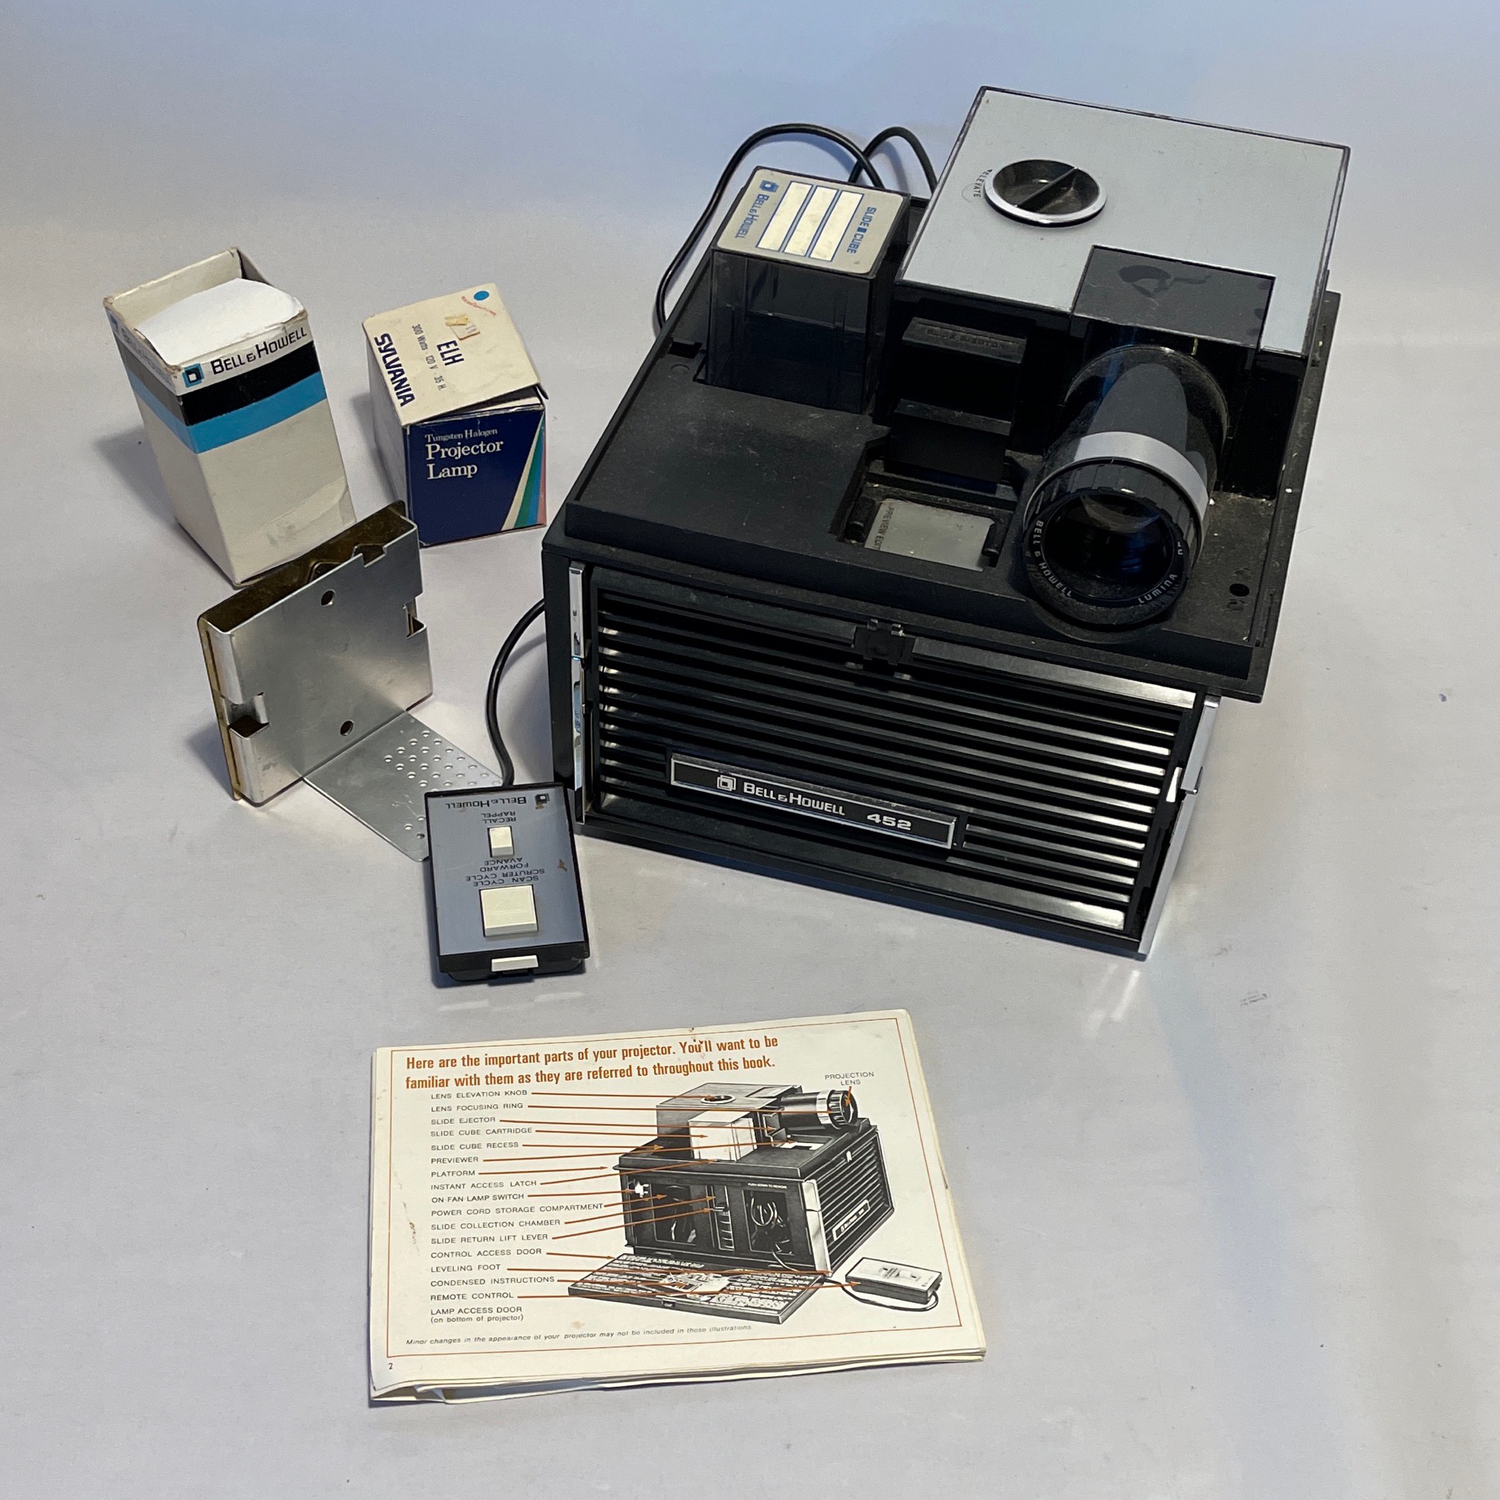 Bell & Howell 452 Projector & Accessories